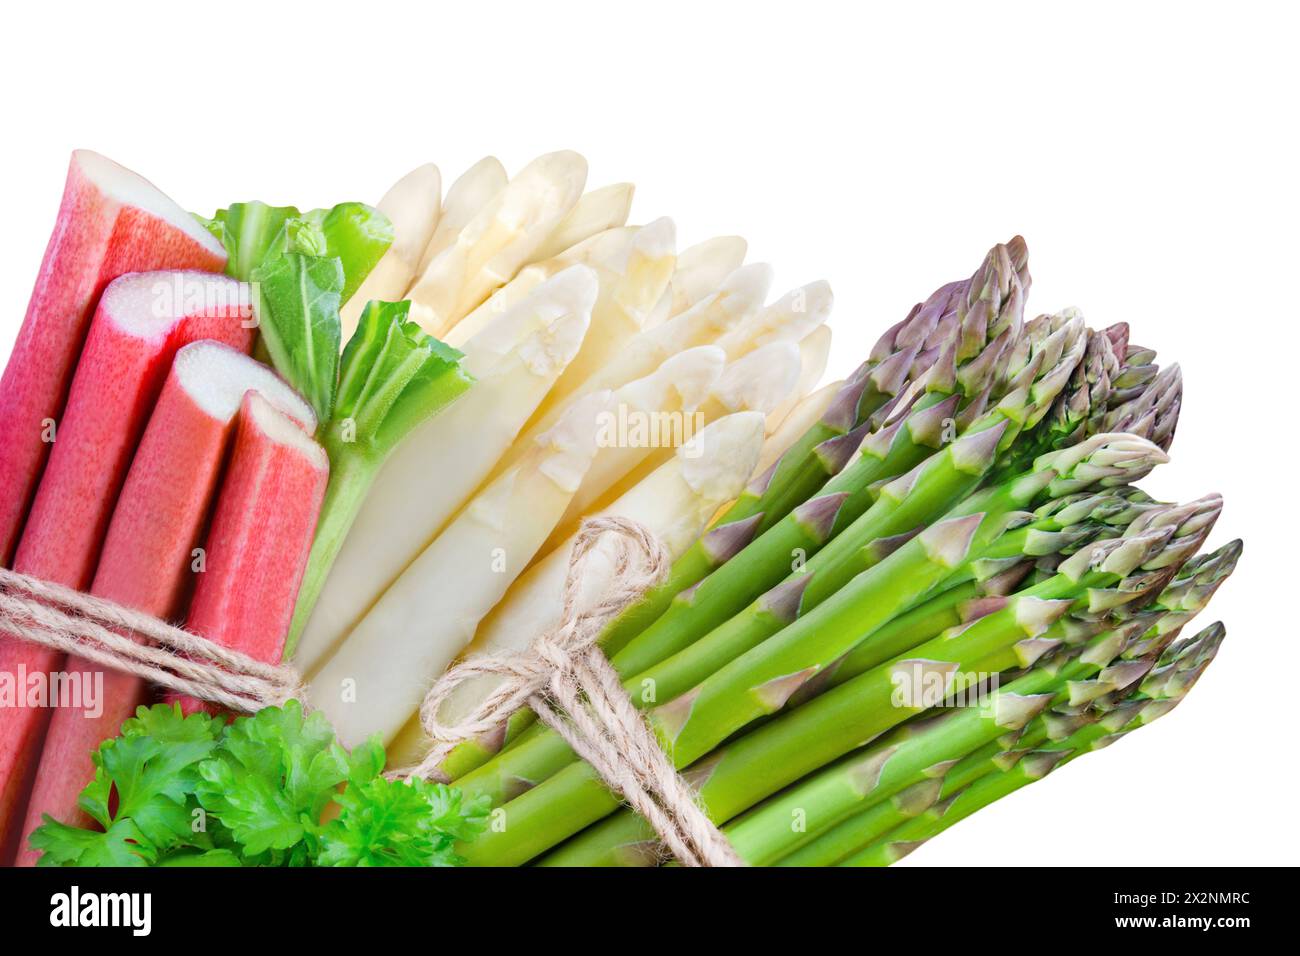 Asparagus and Rhubarb isolated on white background Stock Photo